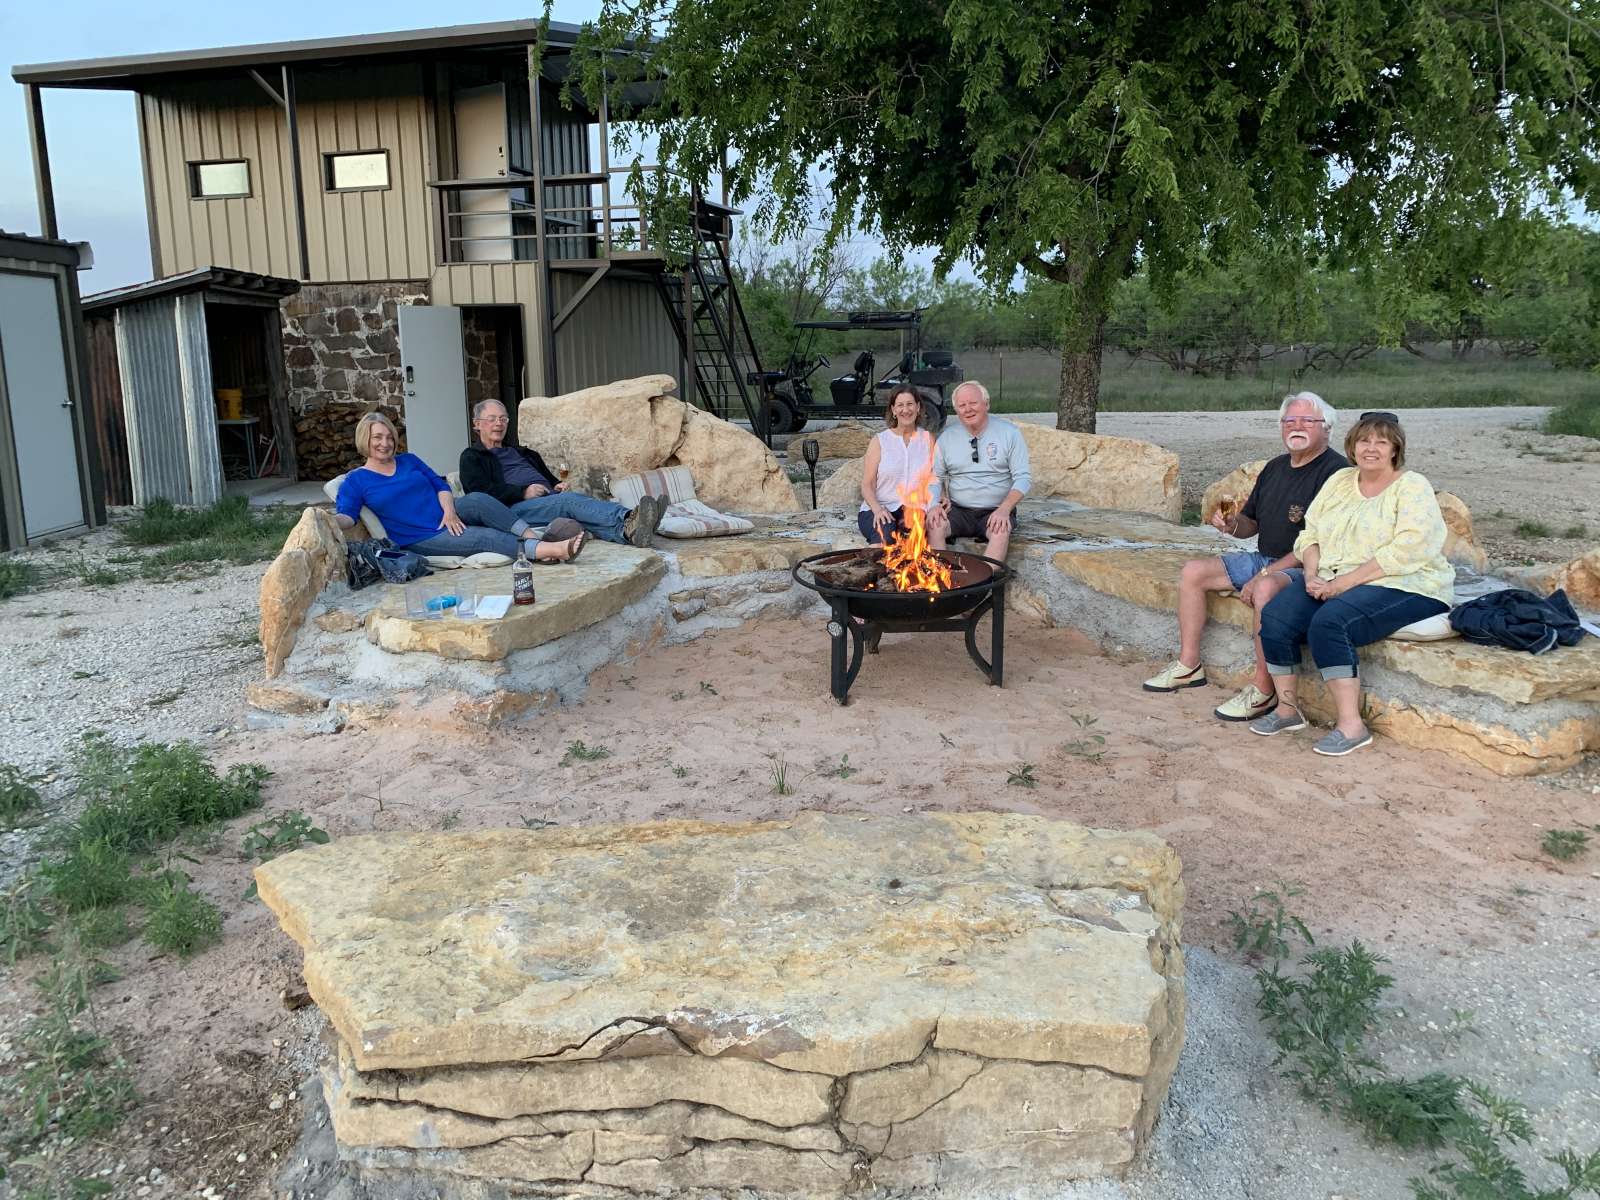 Couples posing for a picture with firepit in the foreground